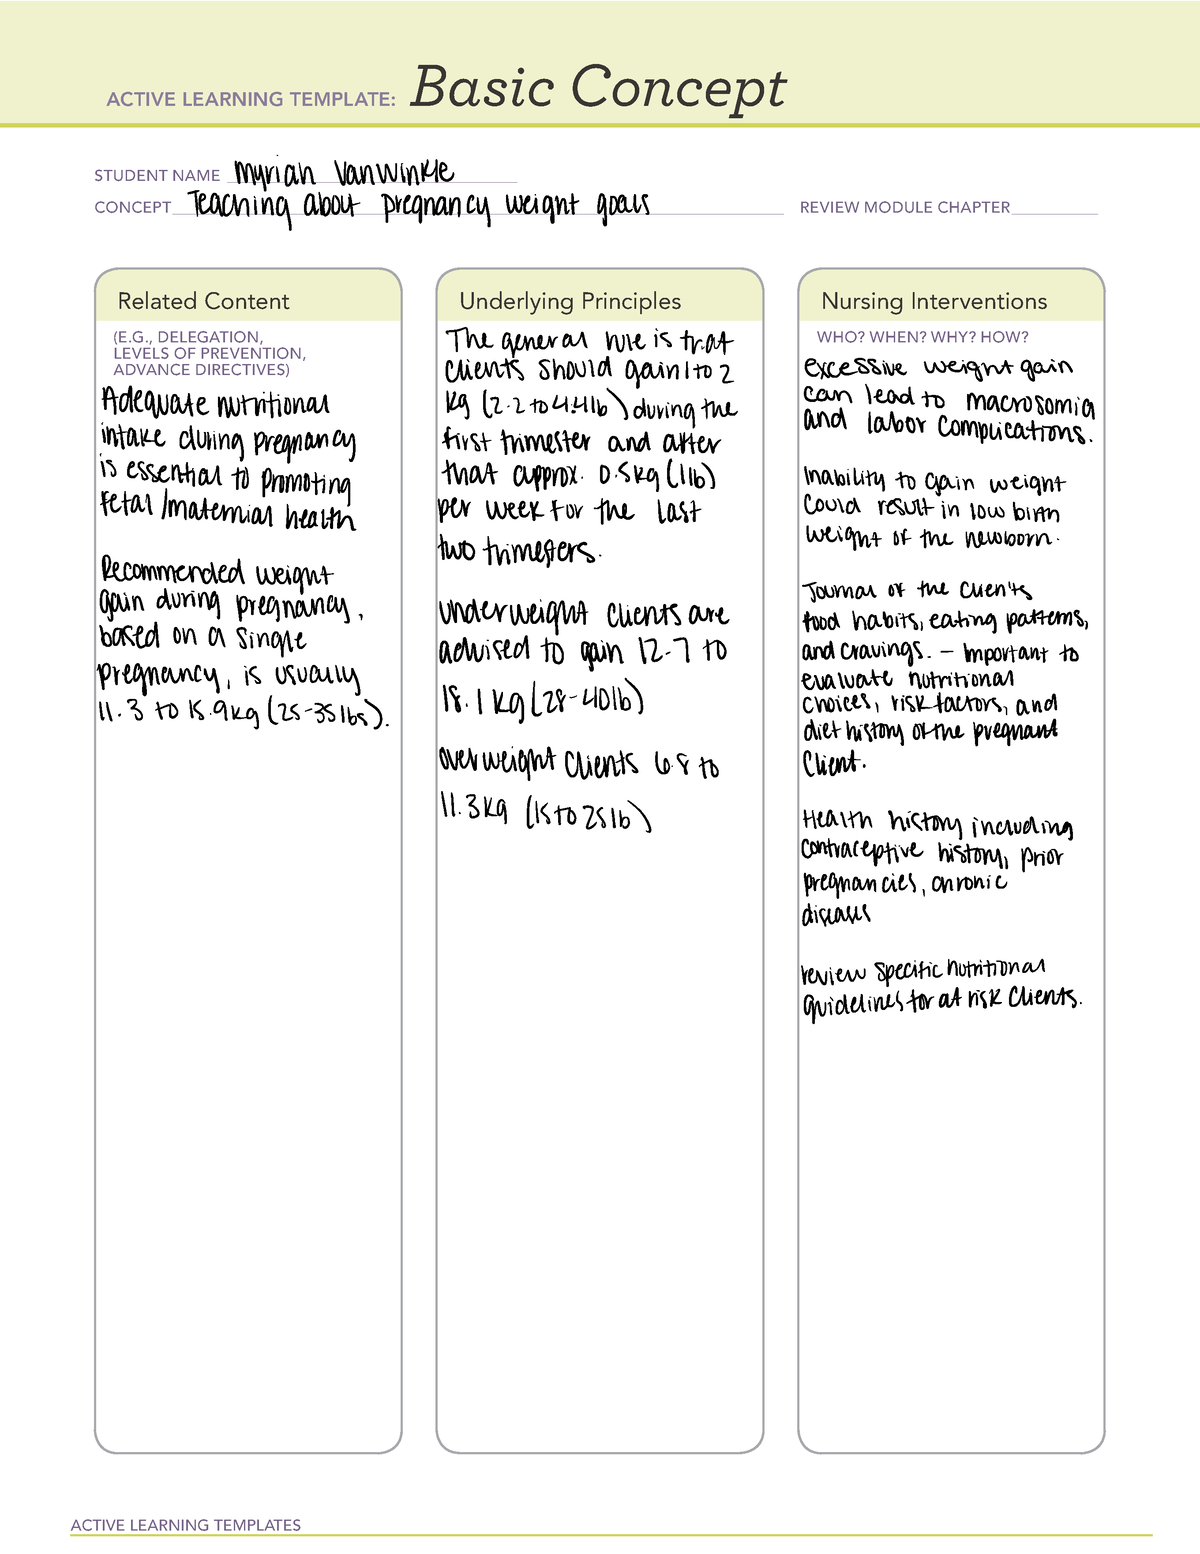 teaching-about-pregnancy-weight-goals-2-active-learning-templates-basic-concept-student-name